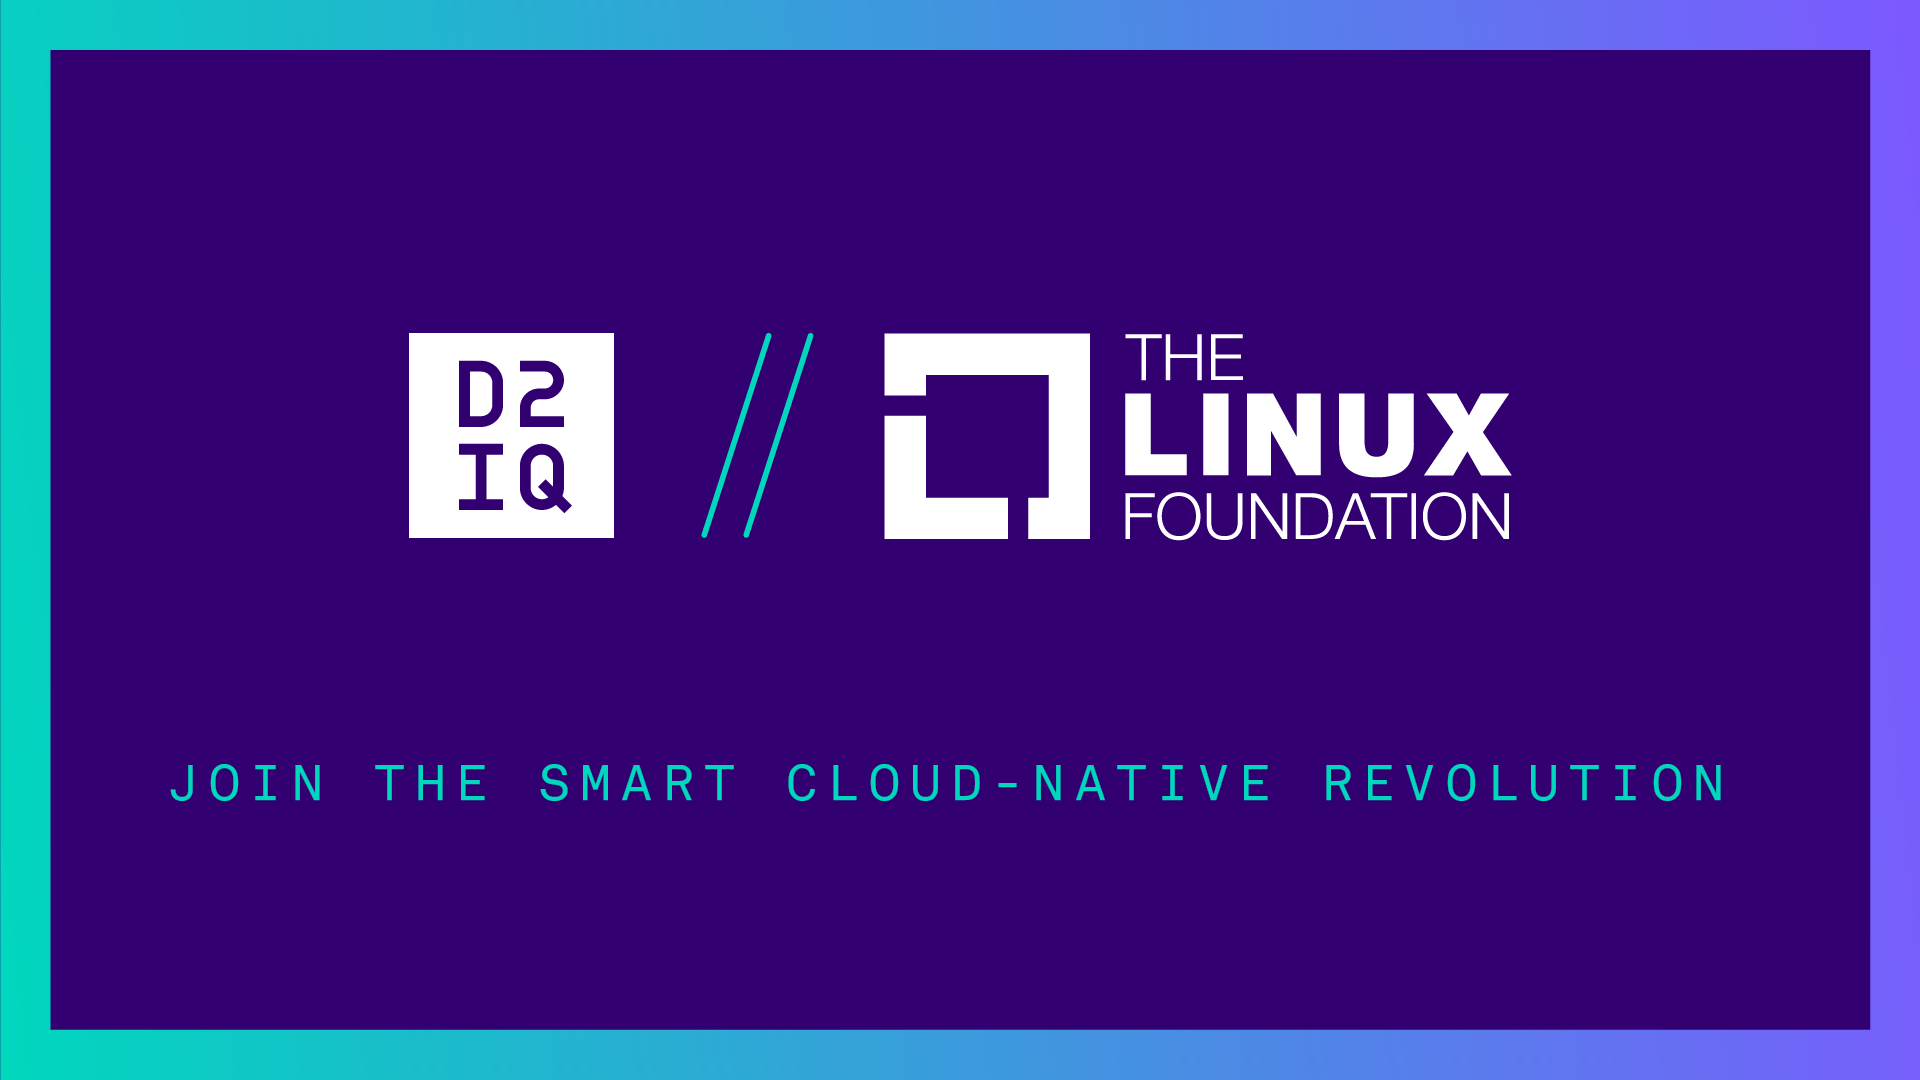 Join the Smart Cloud-Native Revolution